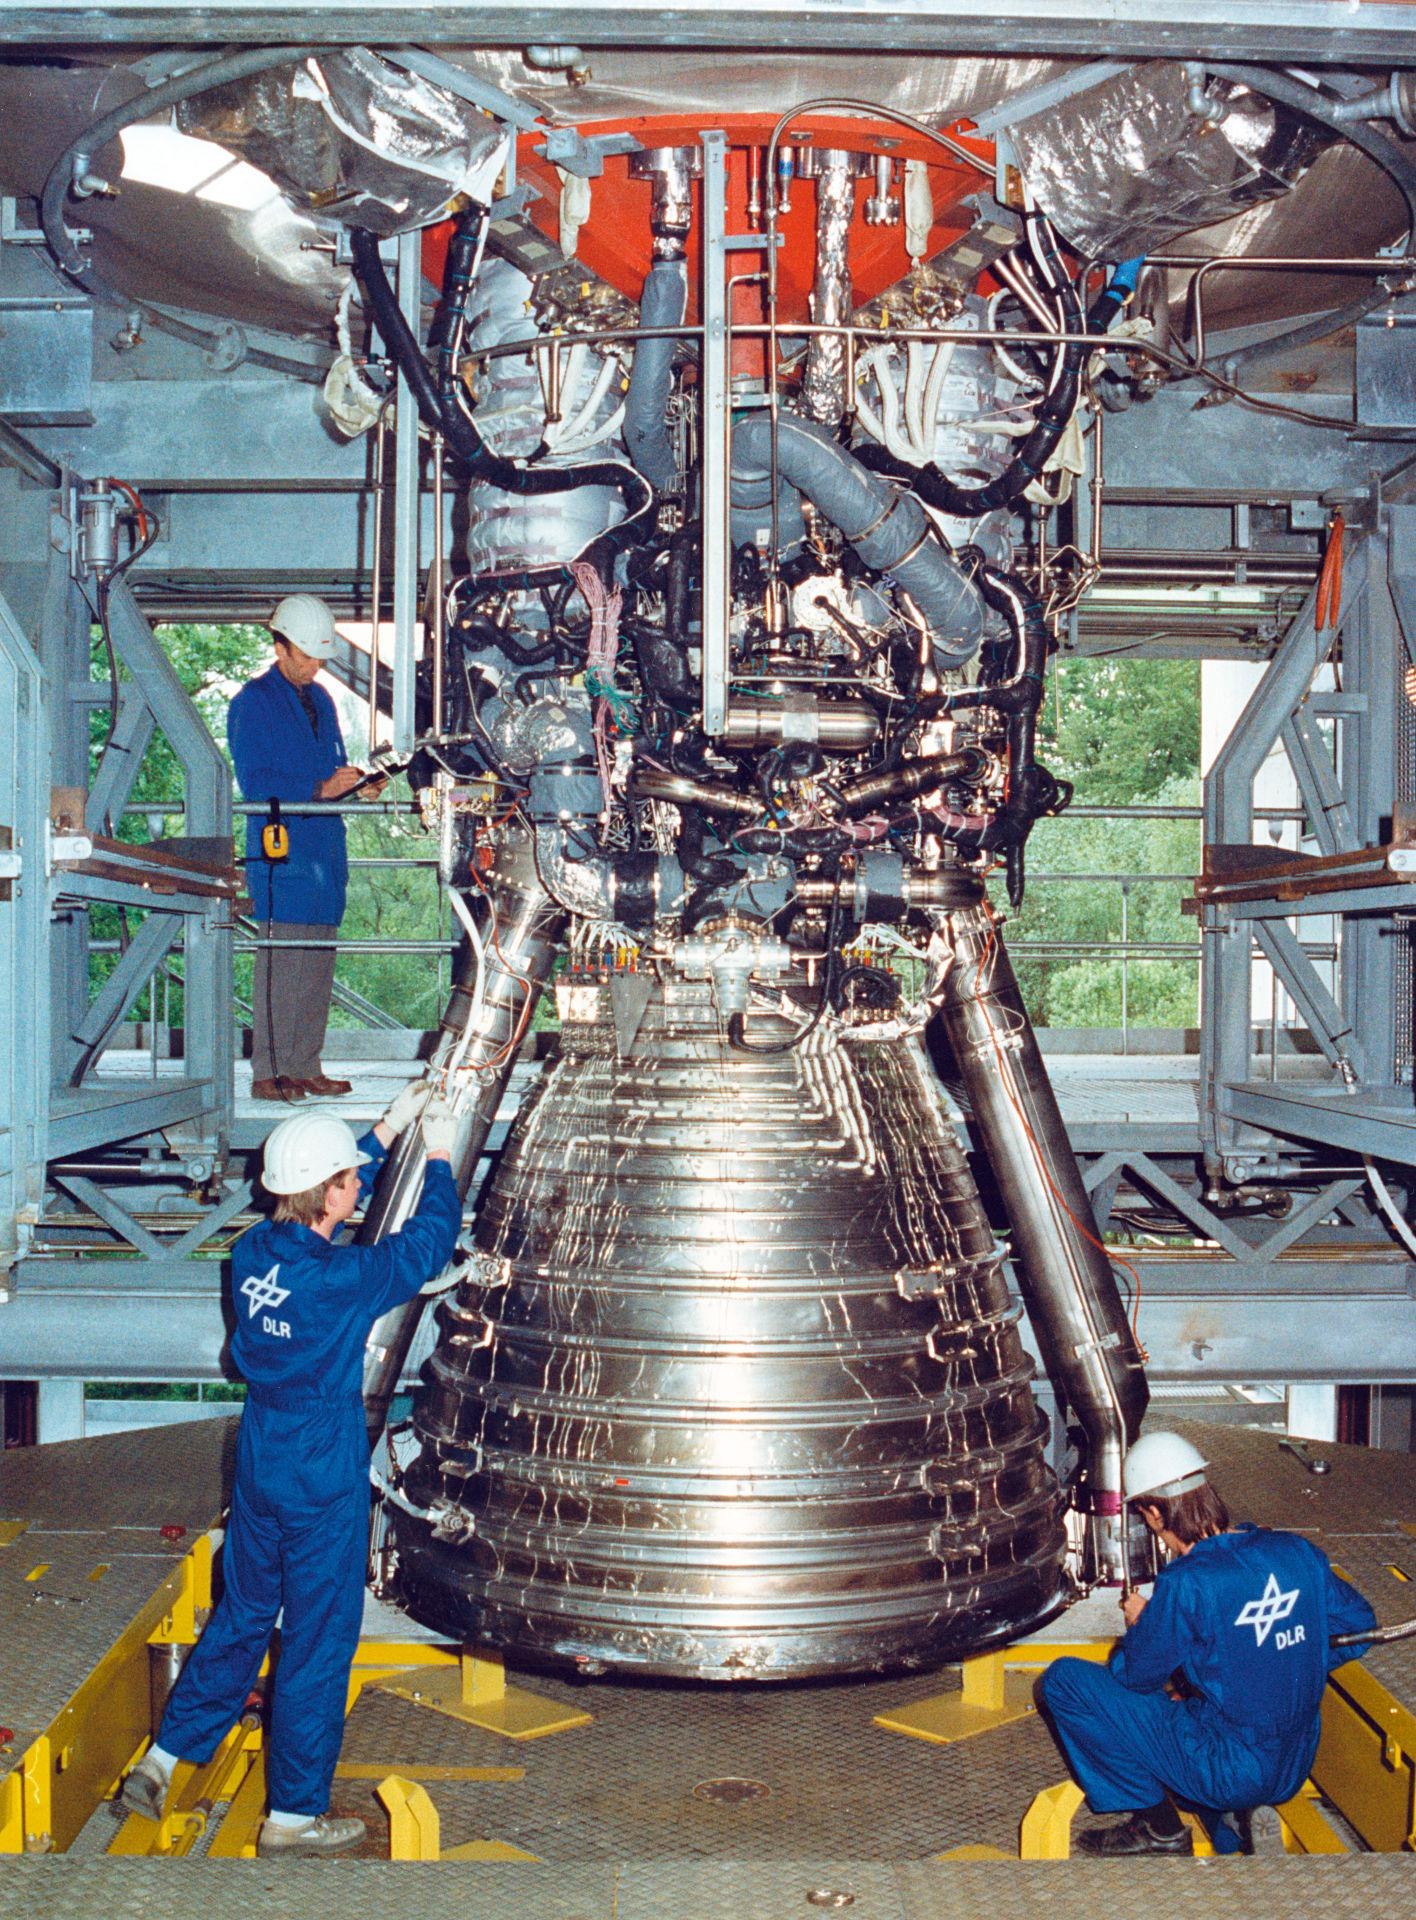 Installation of a Vulcain engine on the P5 test facility